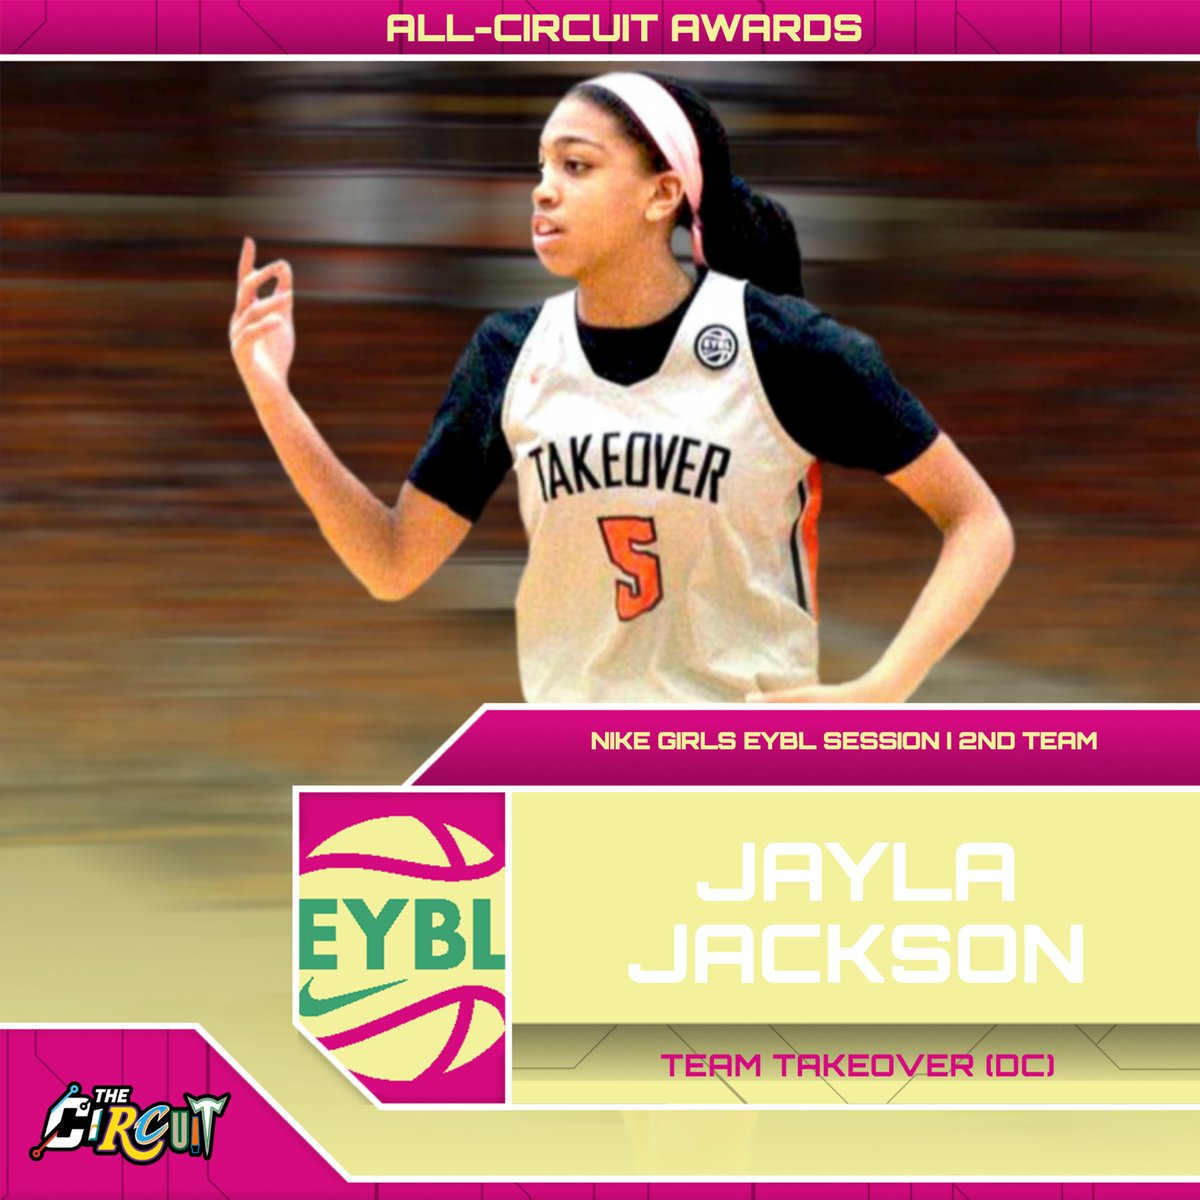 Nike EYBL Hampton | 2nd Team 🥈 Jayla Jackson | Team Takeover (DC) | 2026 Averages ➡️ 17.4 PPG (50.0 FG%), 4.6 RPG All-Circuit Awards ⤵️ thecircuithoops.com/news_article/s…